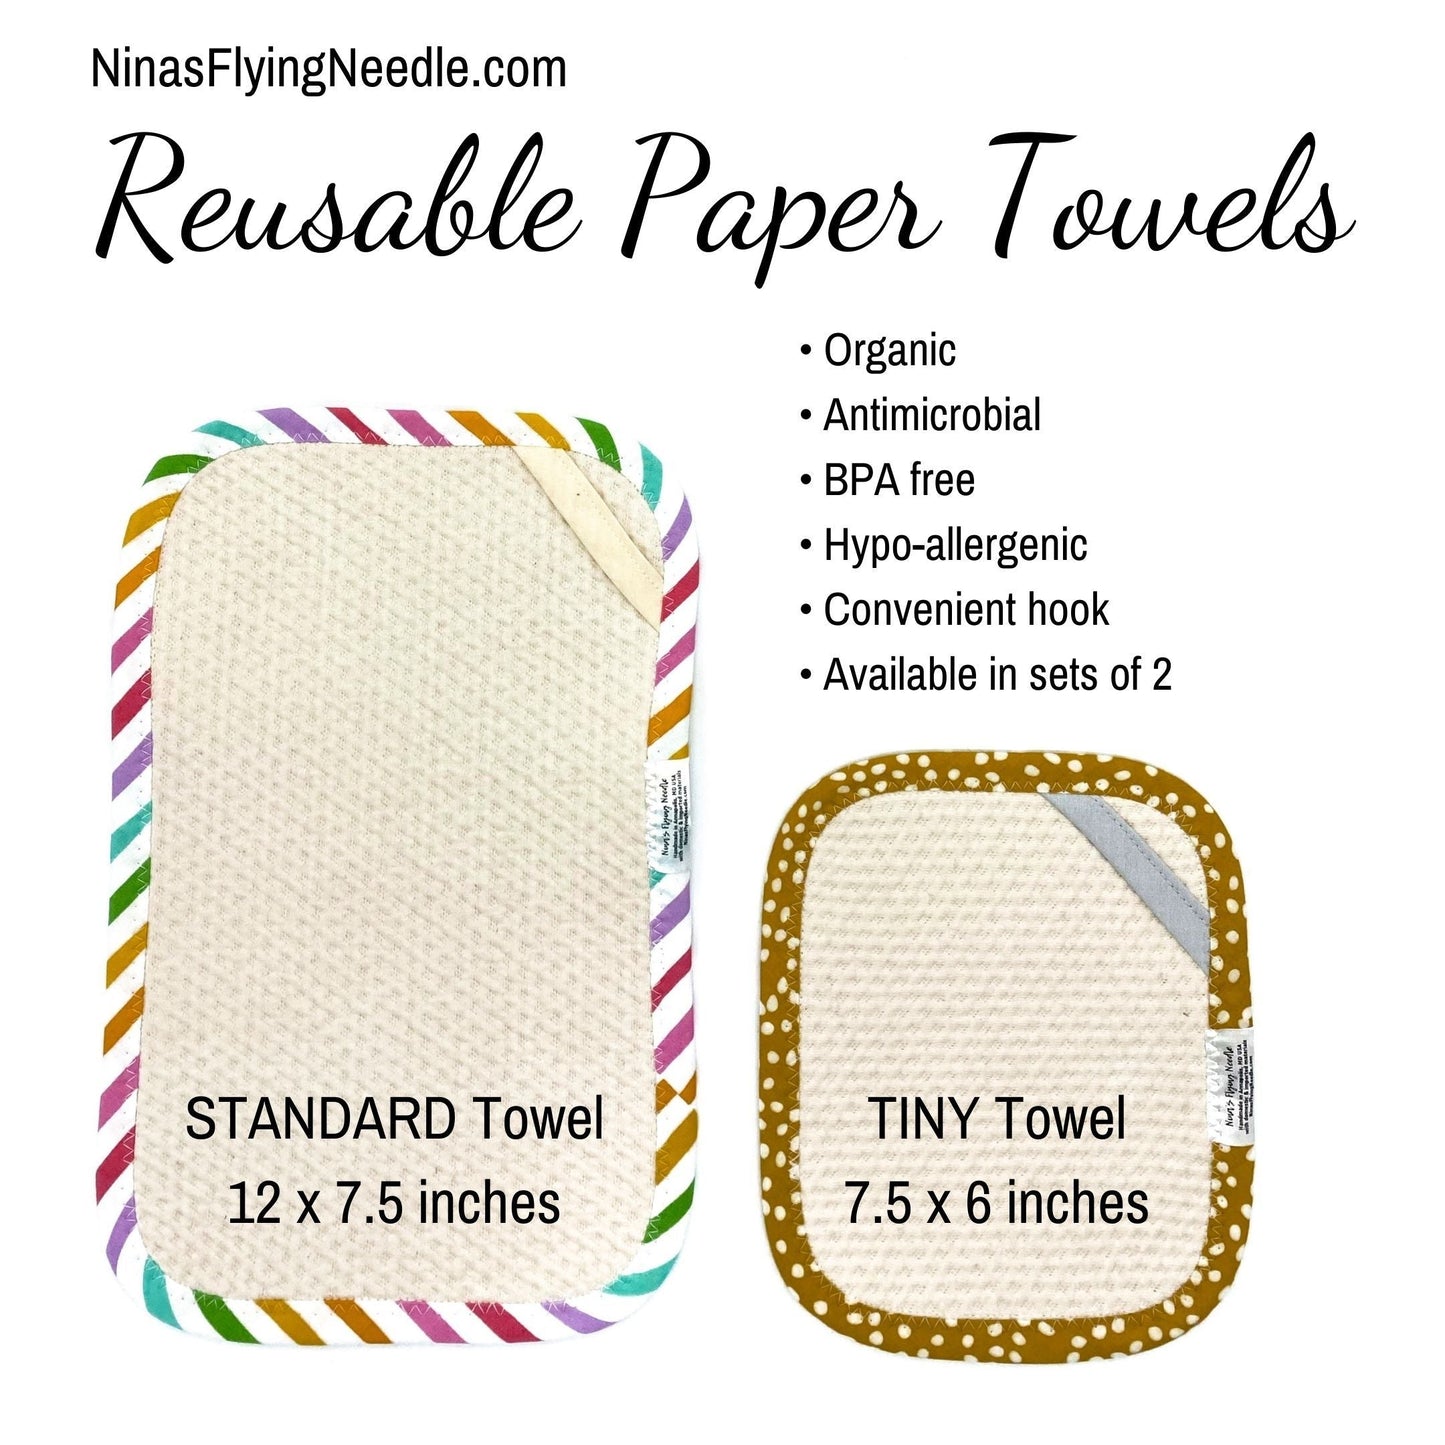 Set of 2 Reusable STANDARD Paper Towels - Strokes - White on Gray